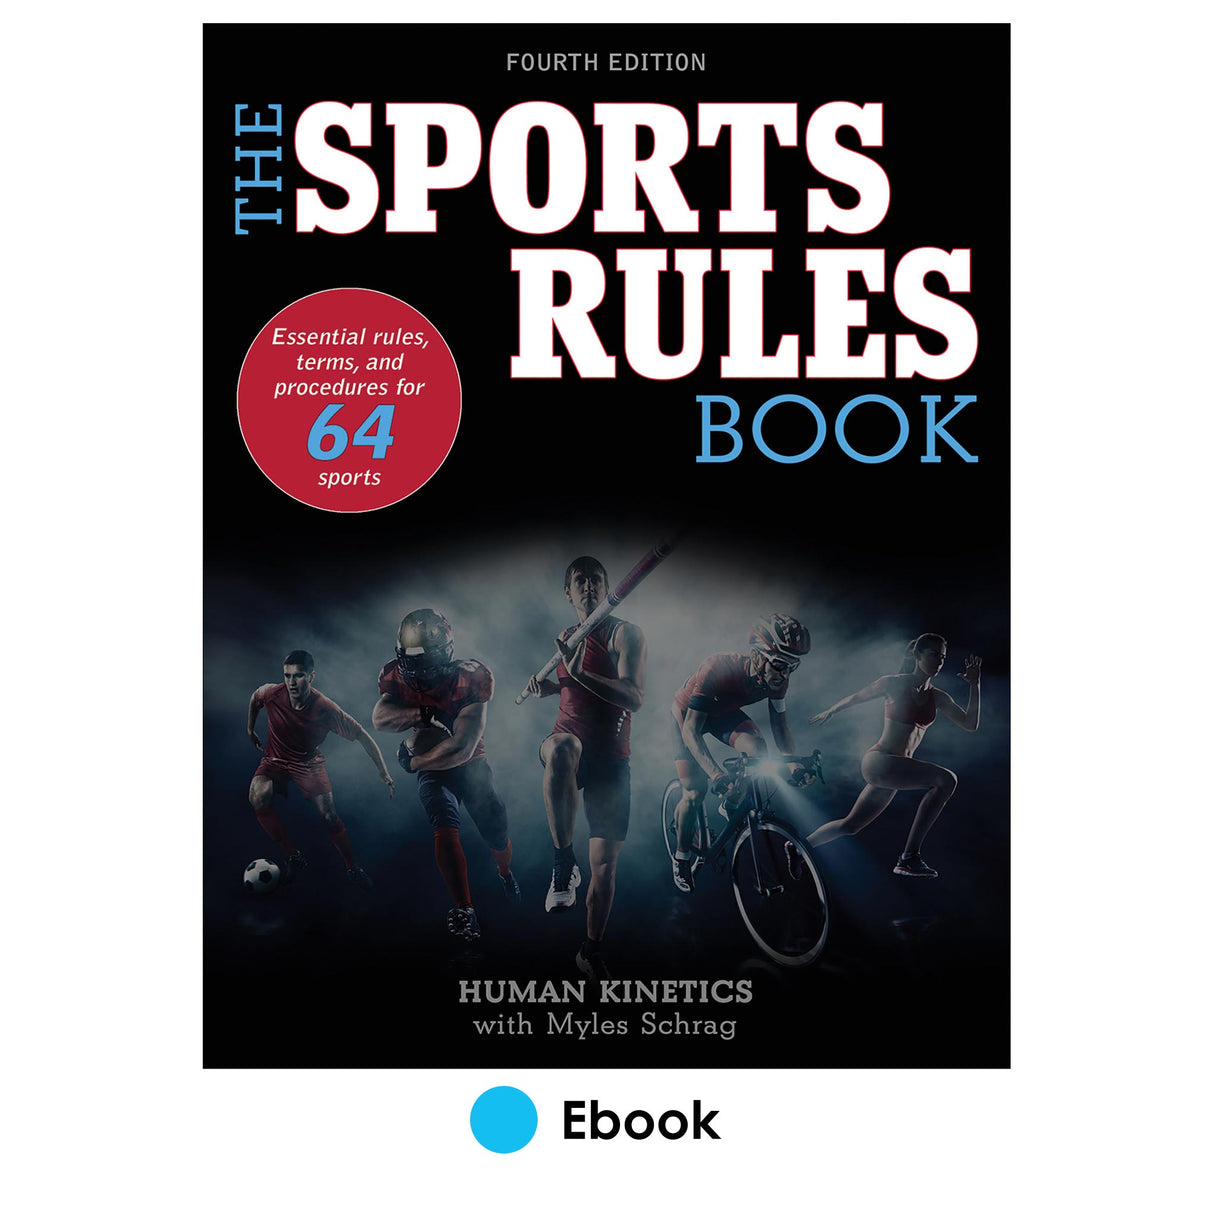 Sports Rules Book 4th Edition epub, The